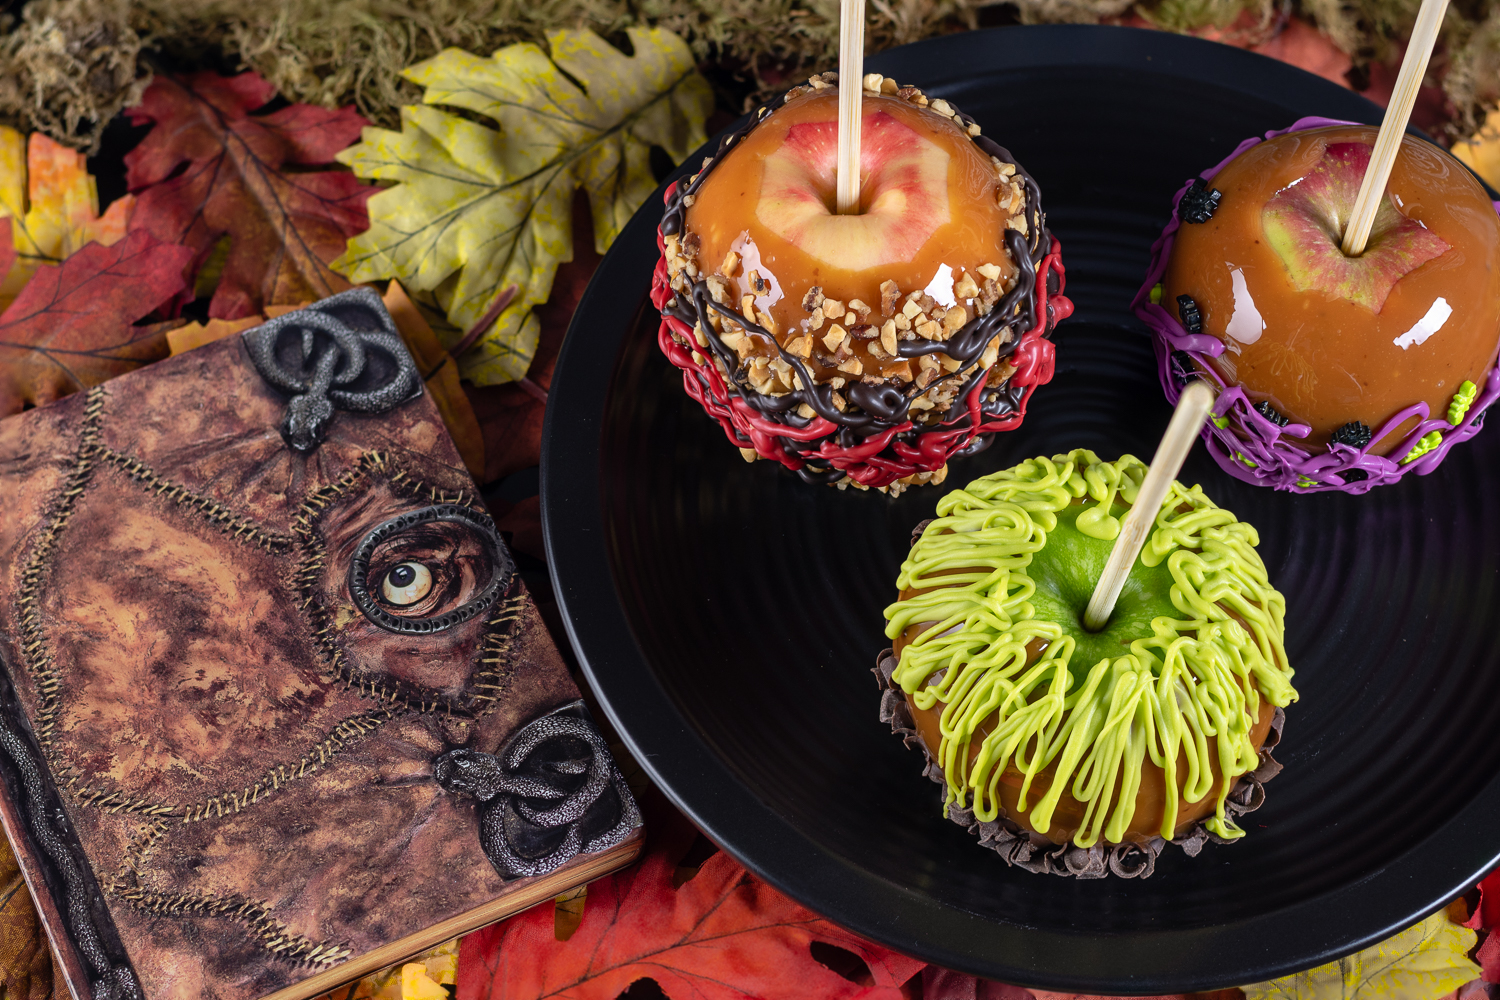 Caramel Apples | Disney Recipes | Halloween Recipes | The Geeks are celebreating Halloween early with their recipe for Sanderson Sisters' Caramel Apples inspired by the Disney film Hocus Pocus! [sponsored] 2geekswhoeat.com